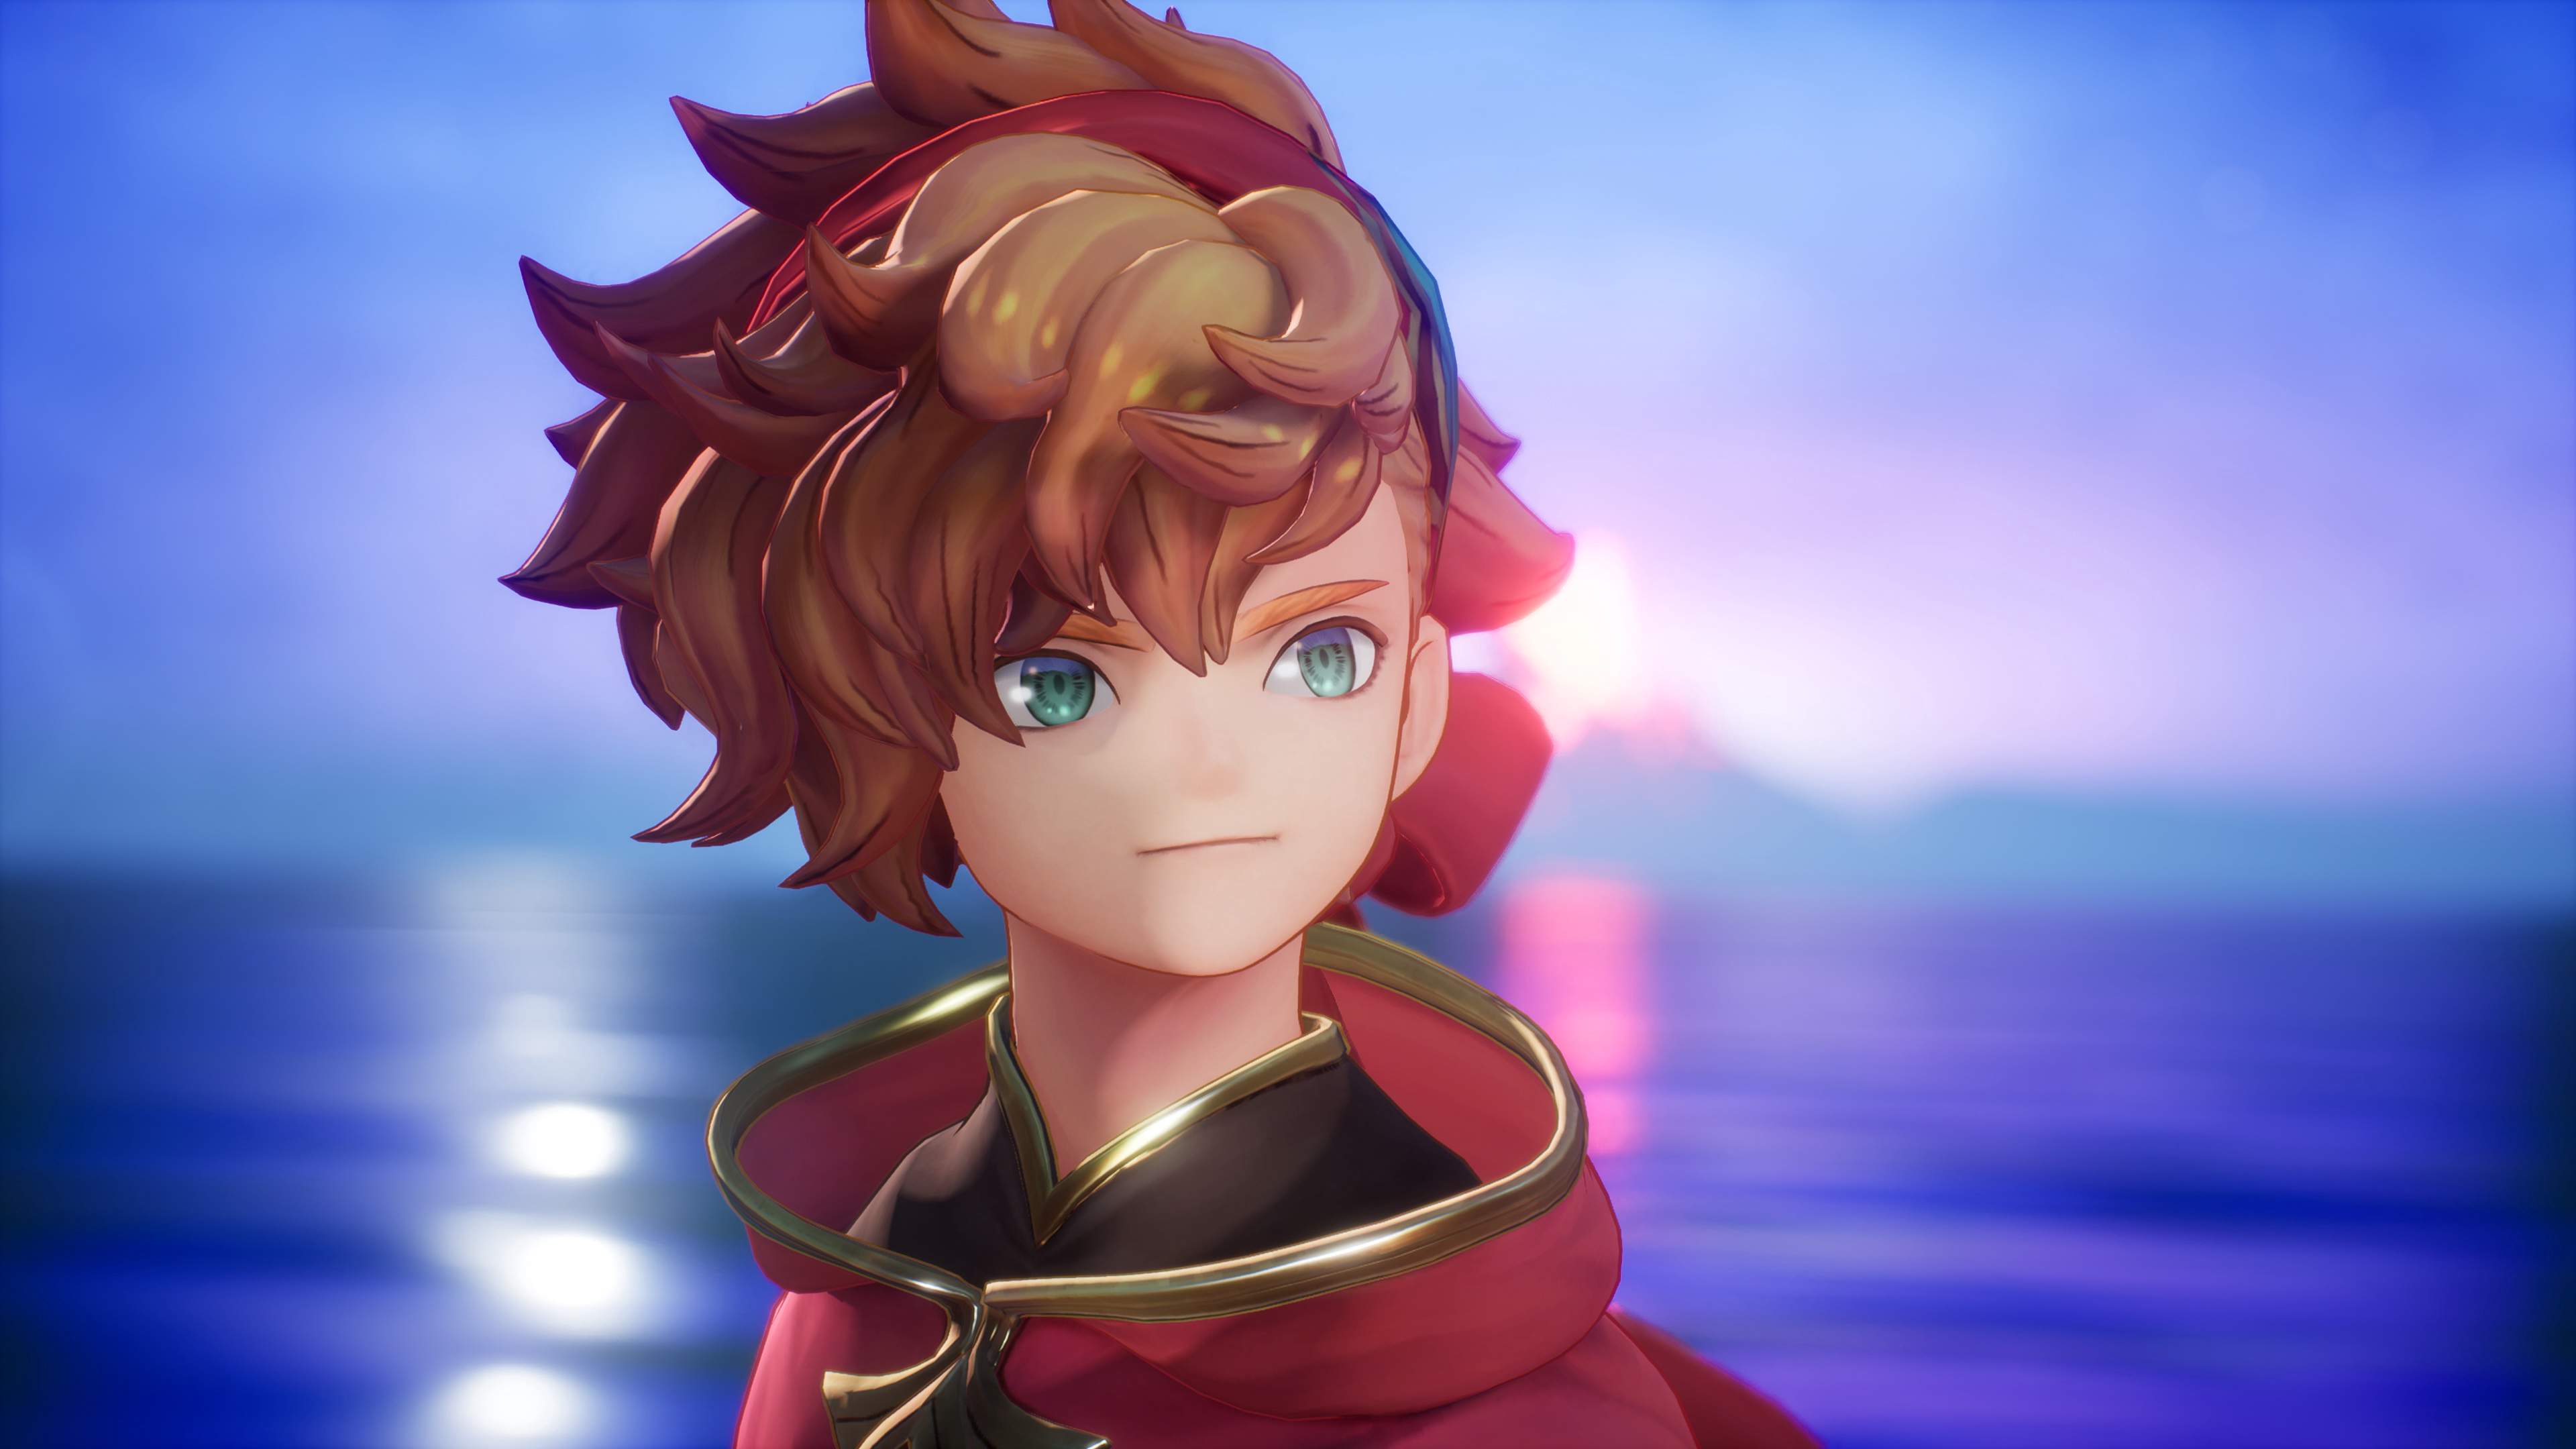 SQUARE ENIX UNVEILS BRAND NEW VISIONS OF MANA AT THE GAME AWARDS SHOW -  Square Enix North America Press Hub